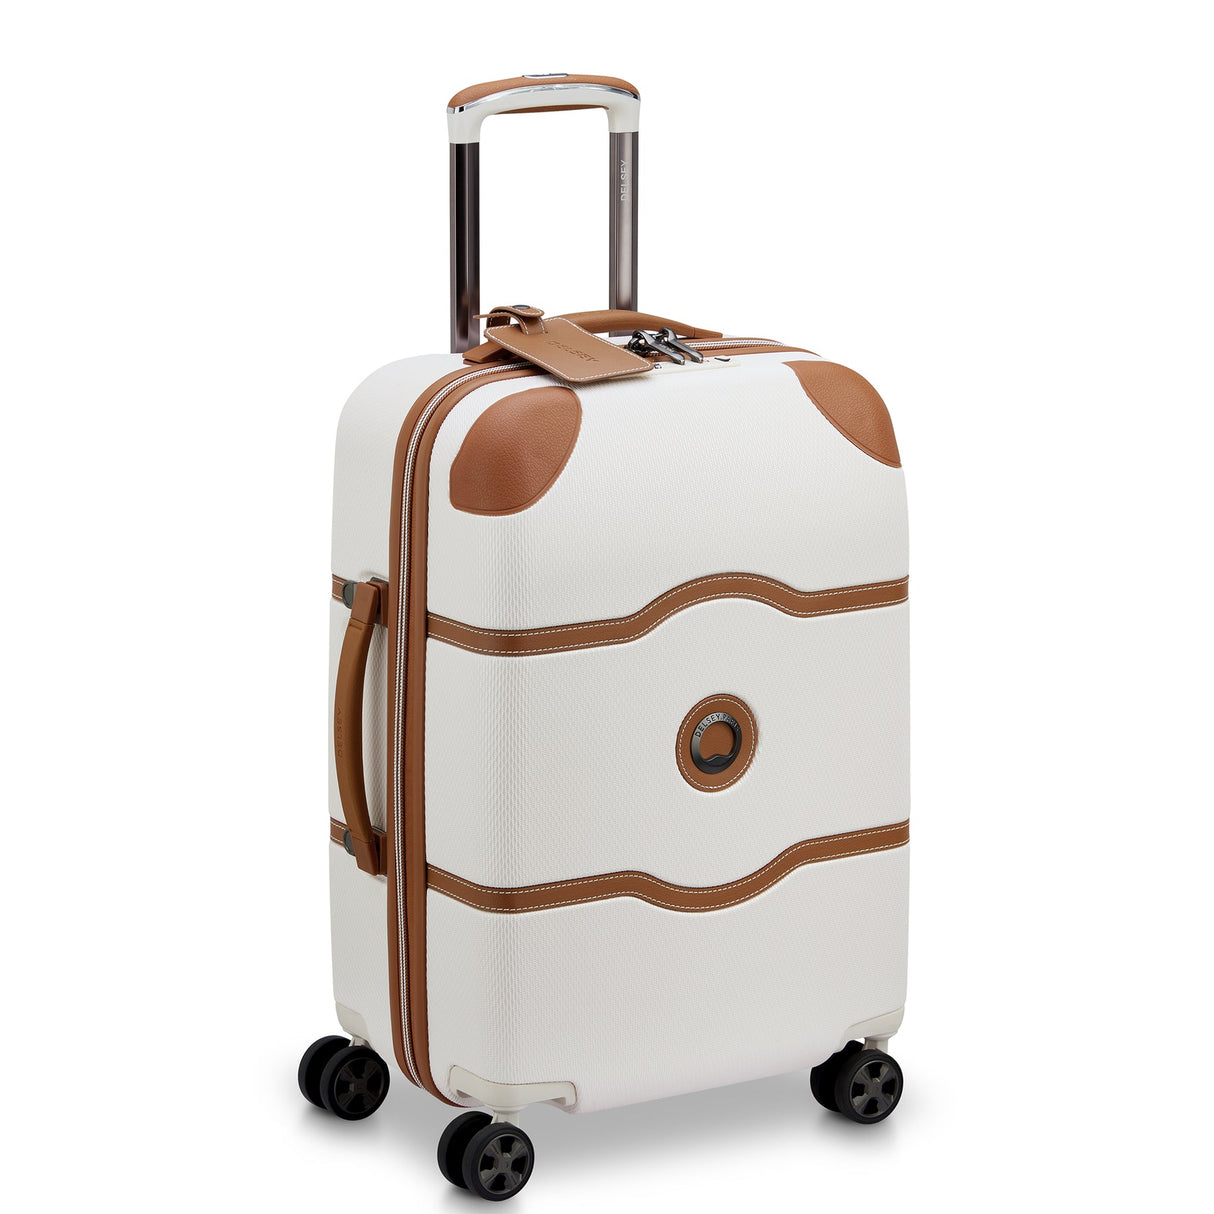 Delsey Chatelet Air 2.0 Carry-On Spinner , , delsey-chatelet-air-2.0-40167680515-02_1800x1800_4cf2787b-e2dd-4cc1-bd5d-9eba85cced5b